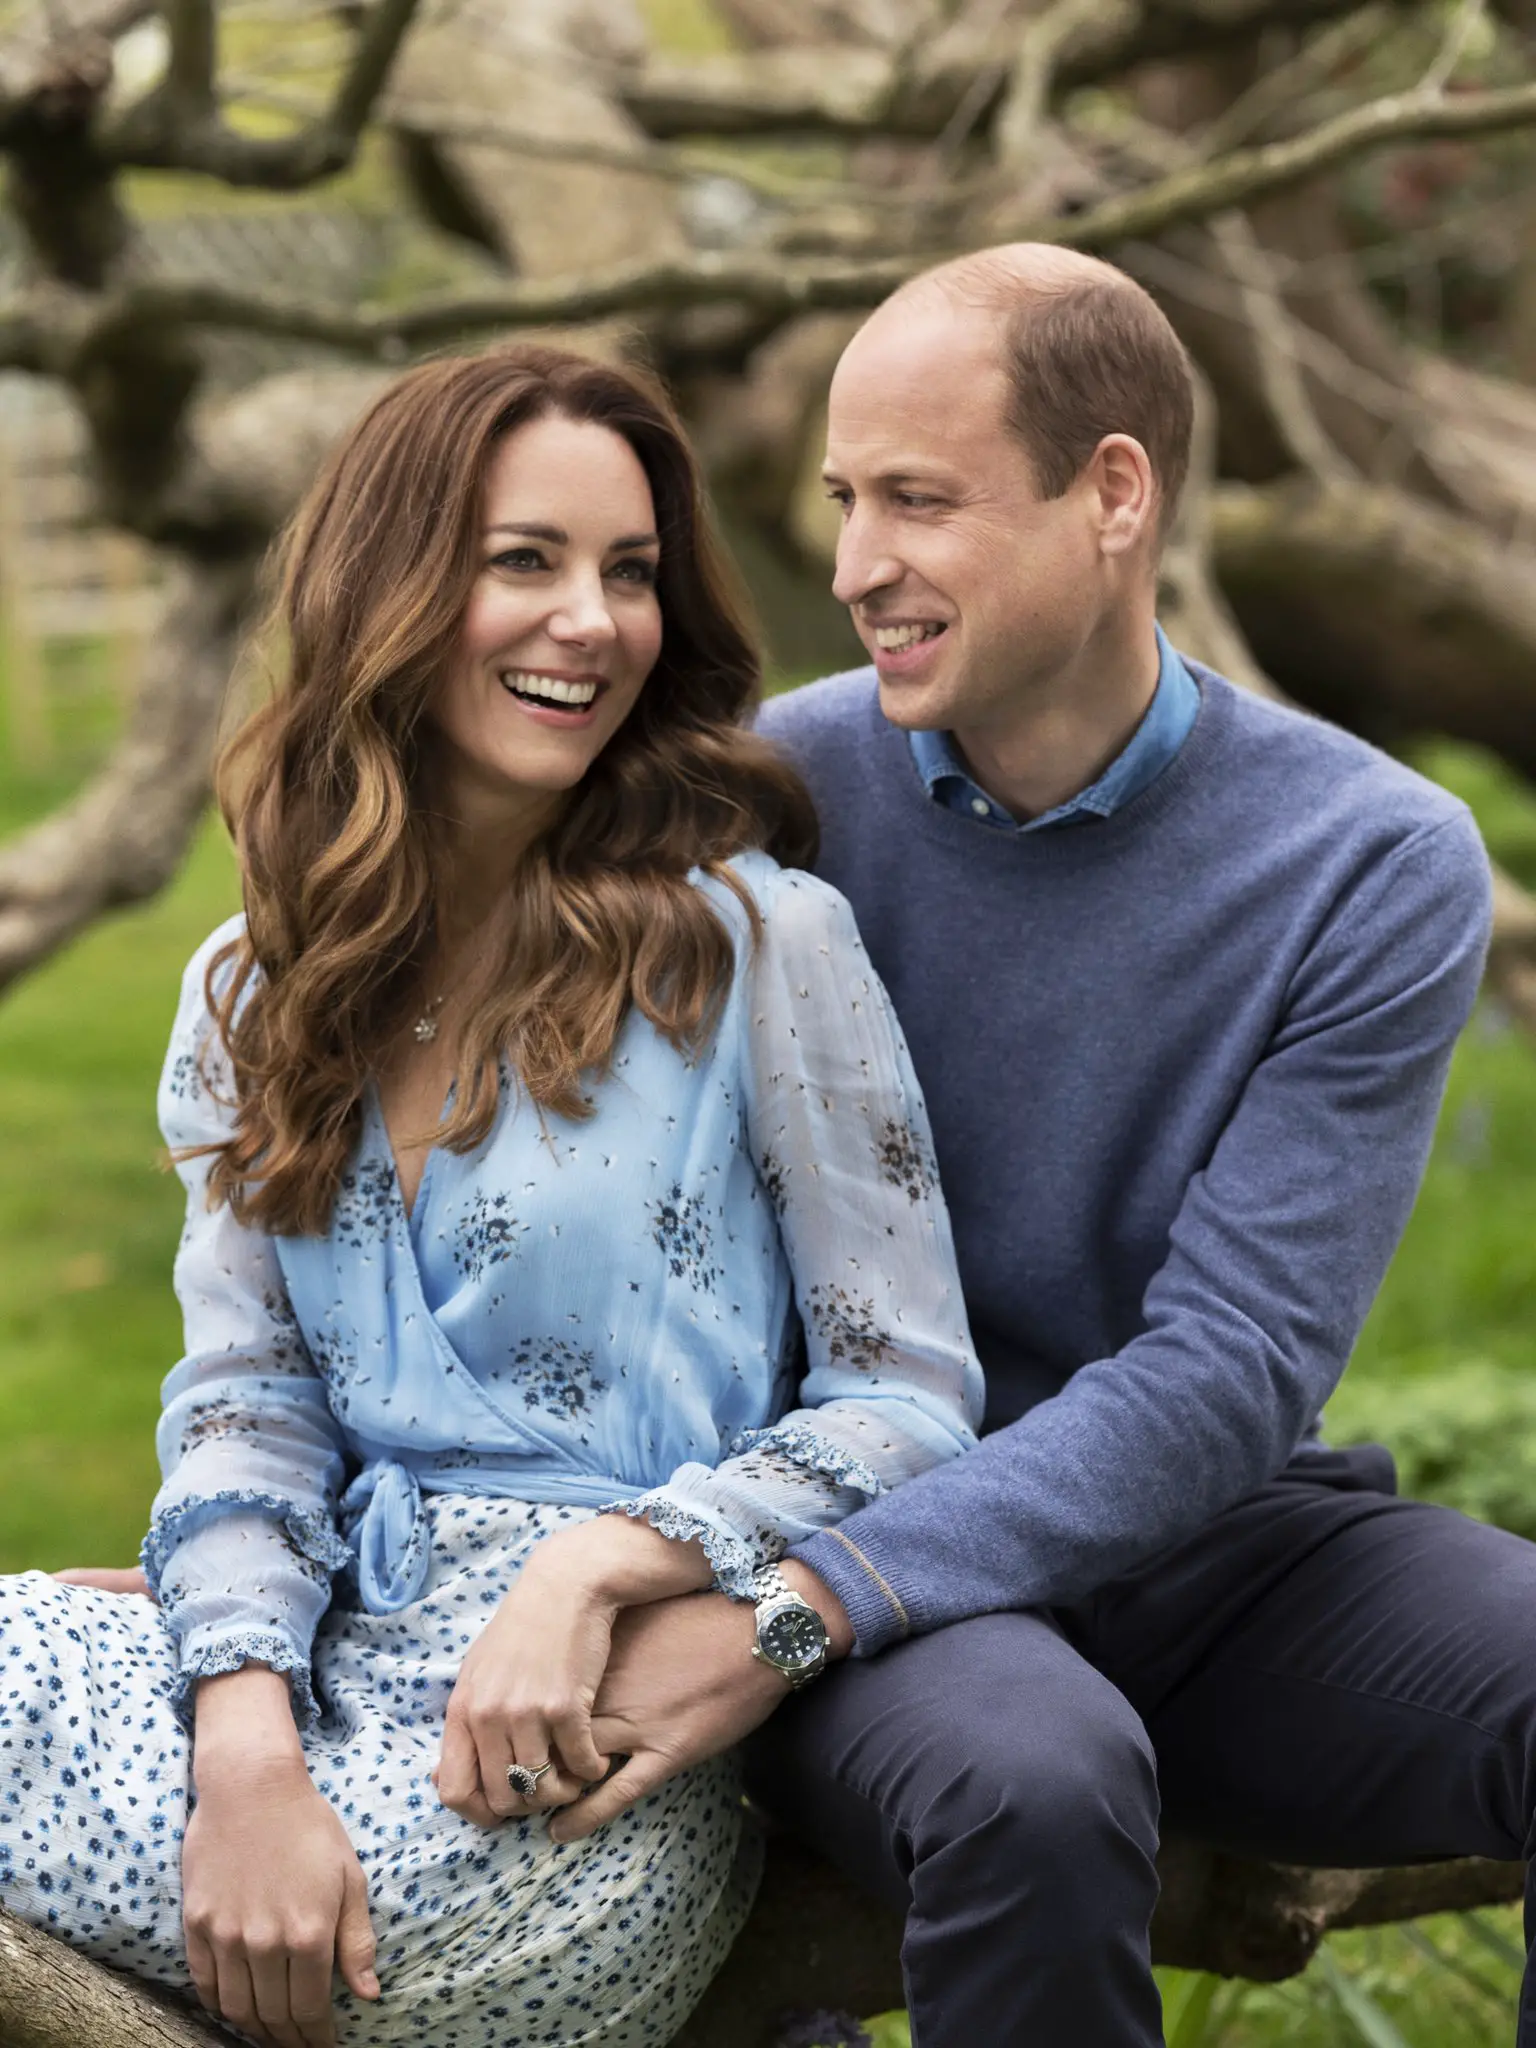 To mark their 10th Wedding anniversary, The Duke and Duchess of Cambridge shared 2 new pictures